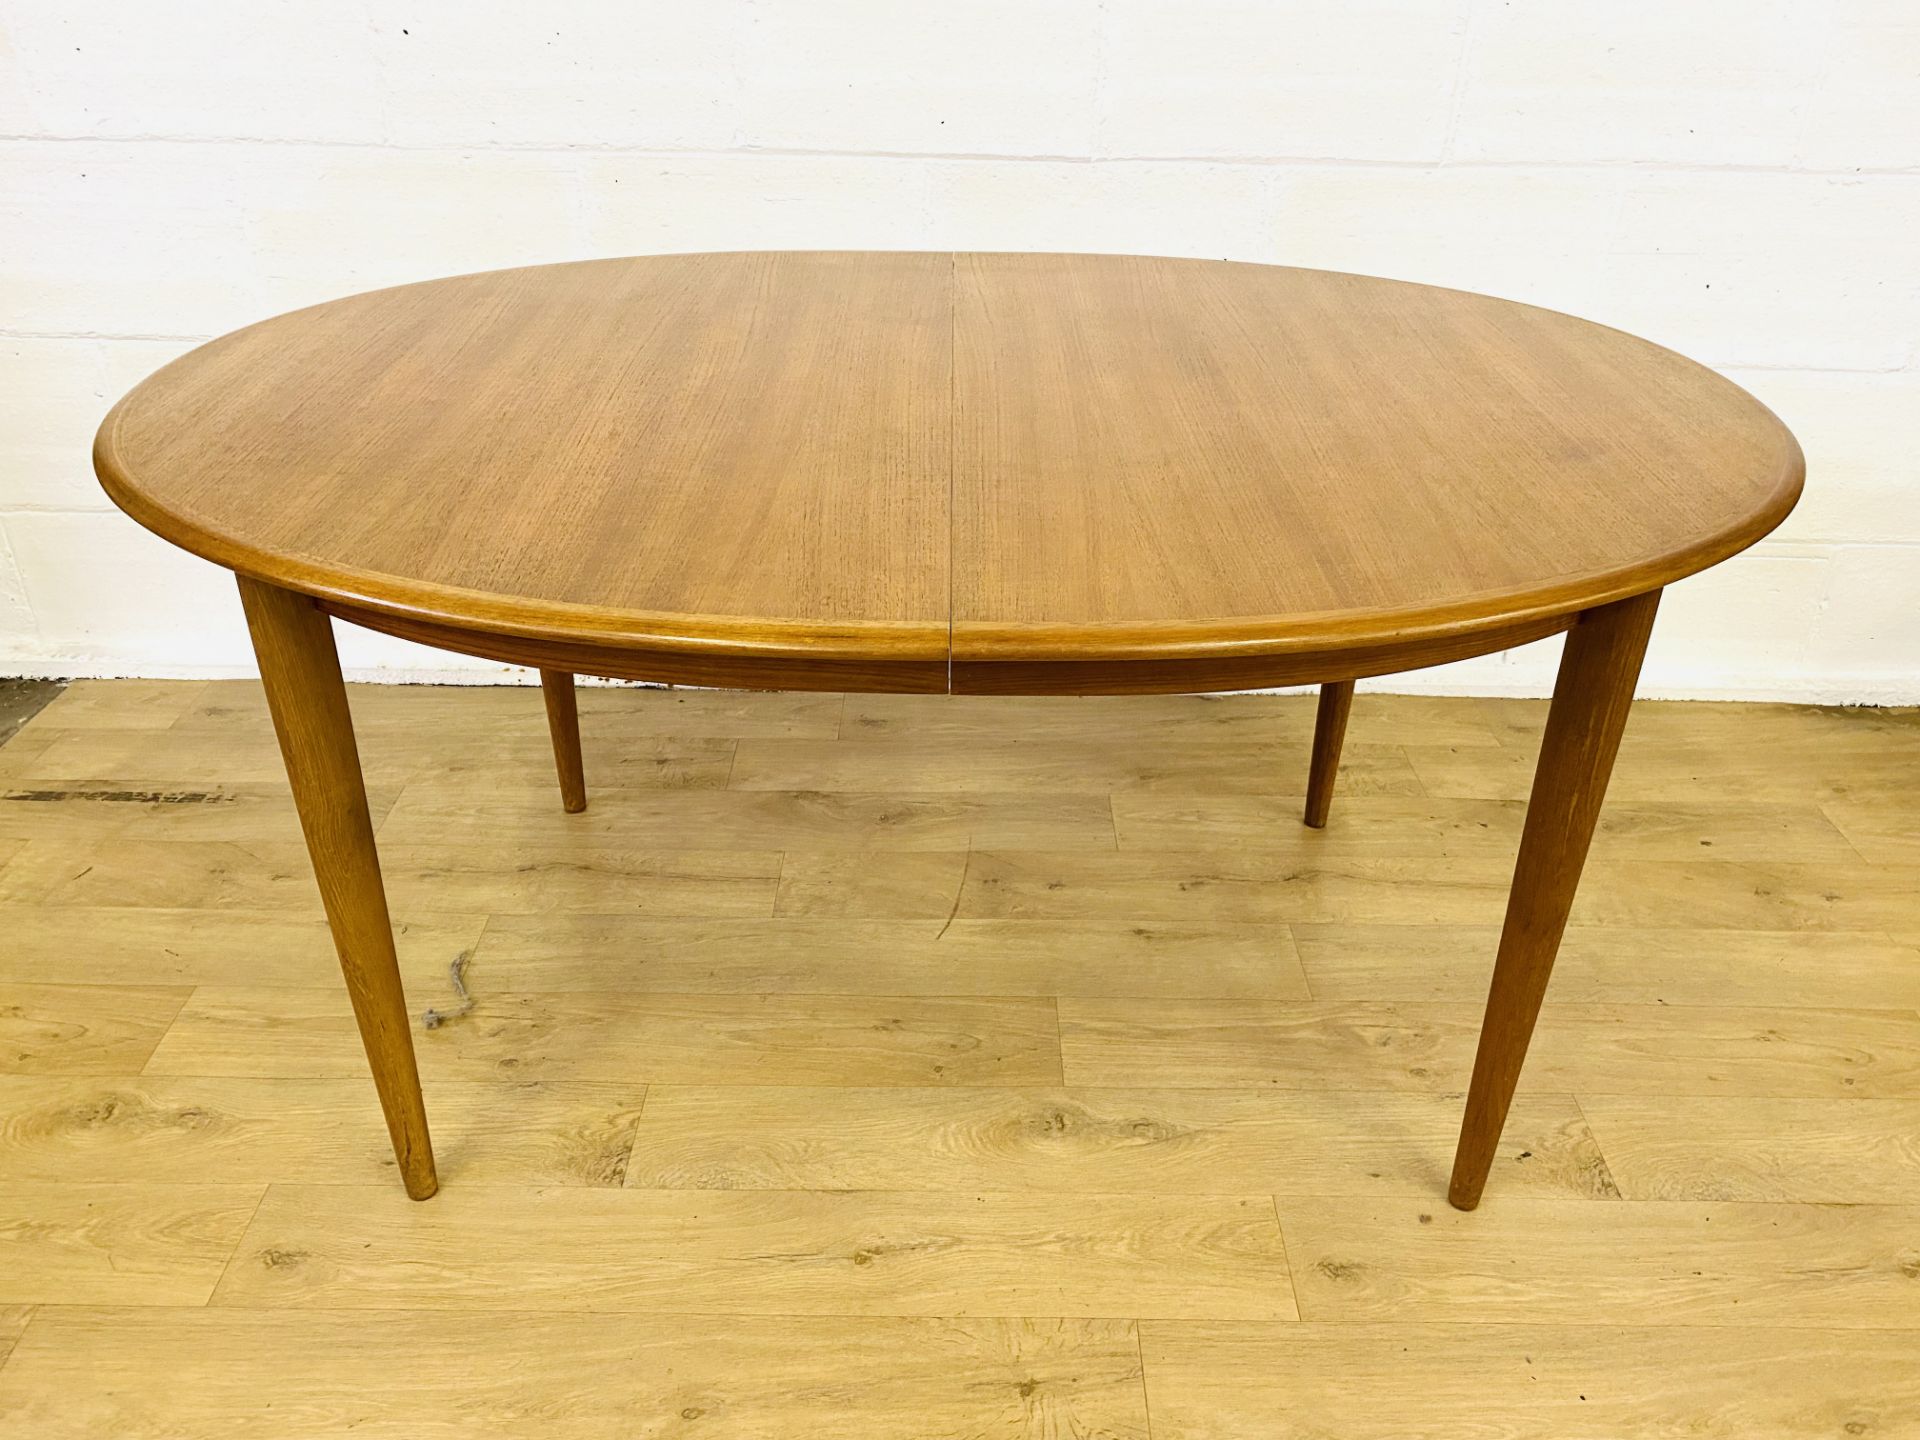 Skovmand and Andersen dining table - Image 8 of 8